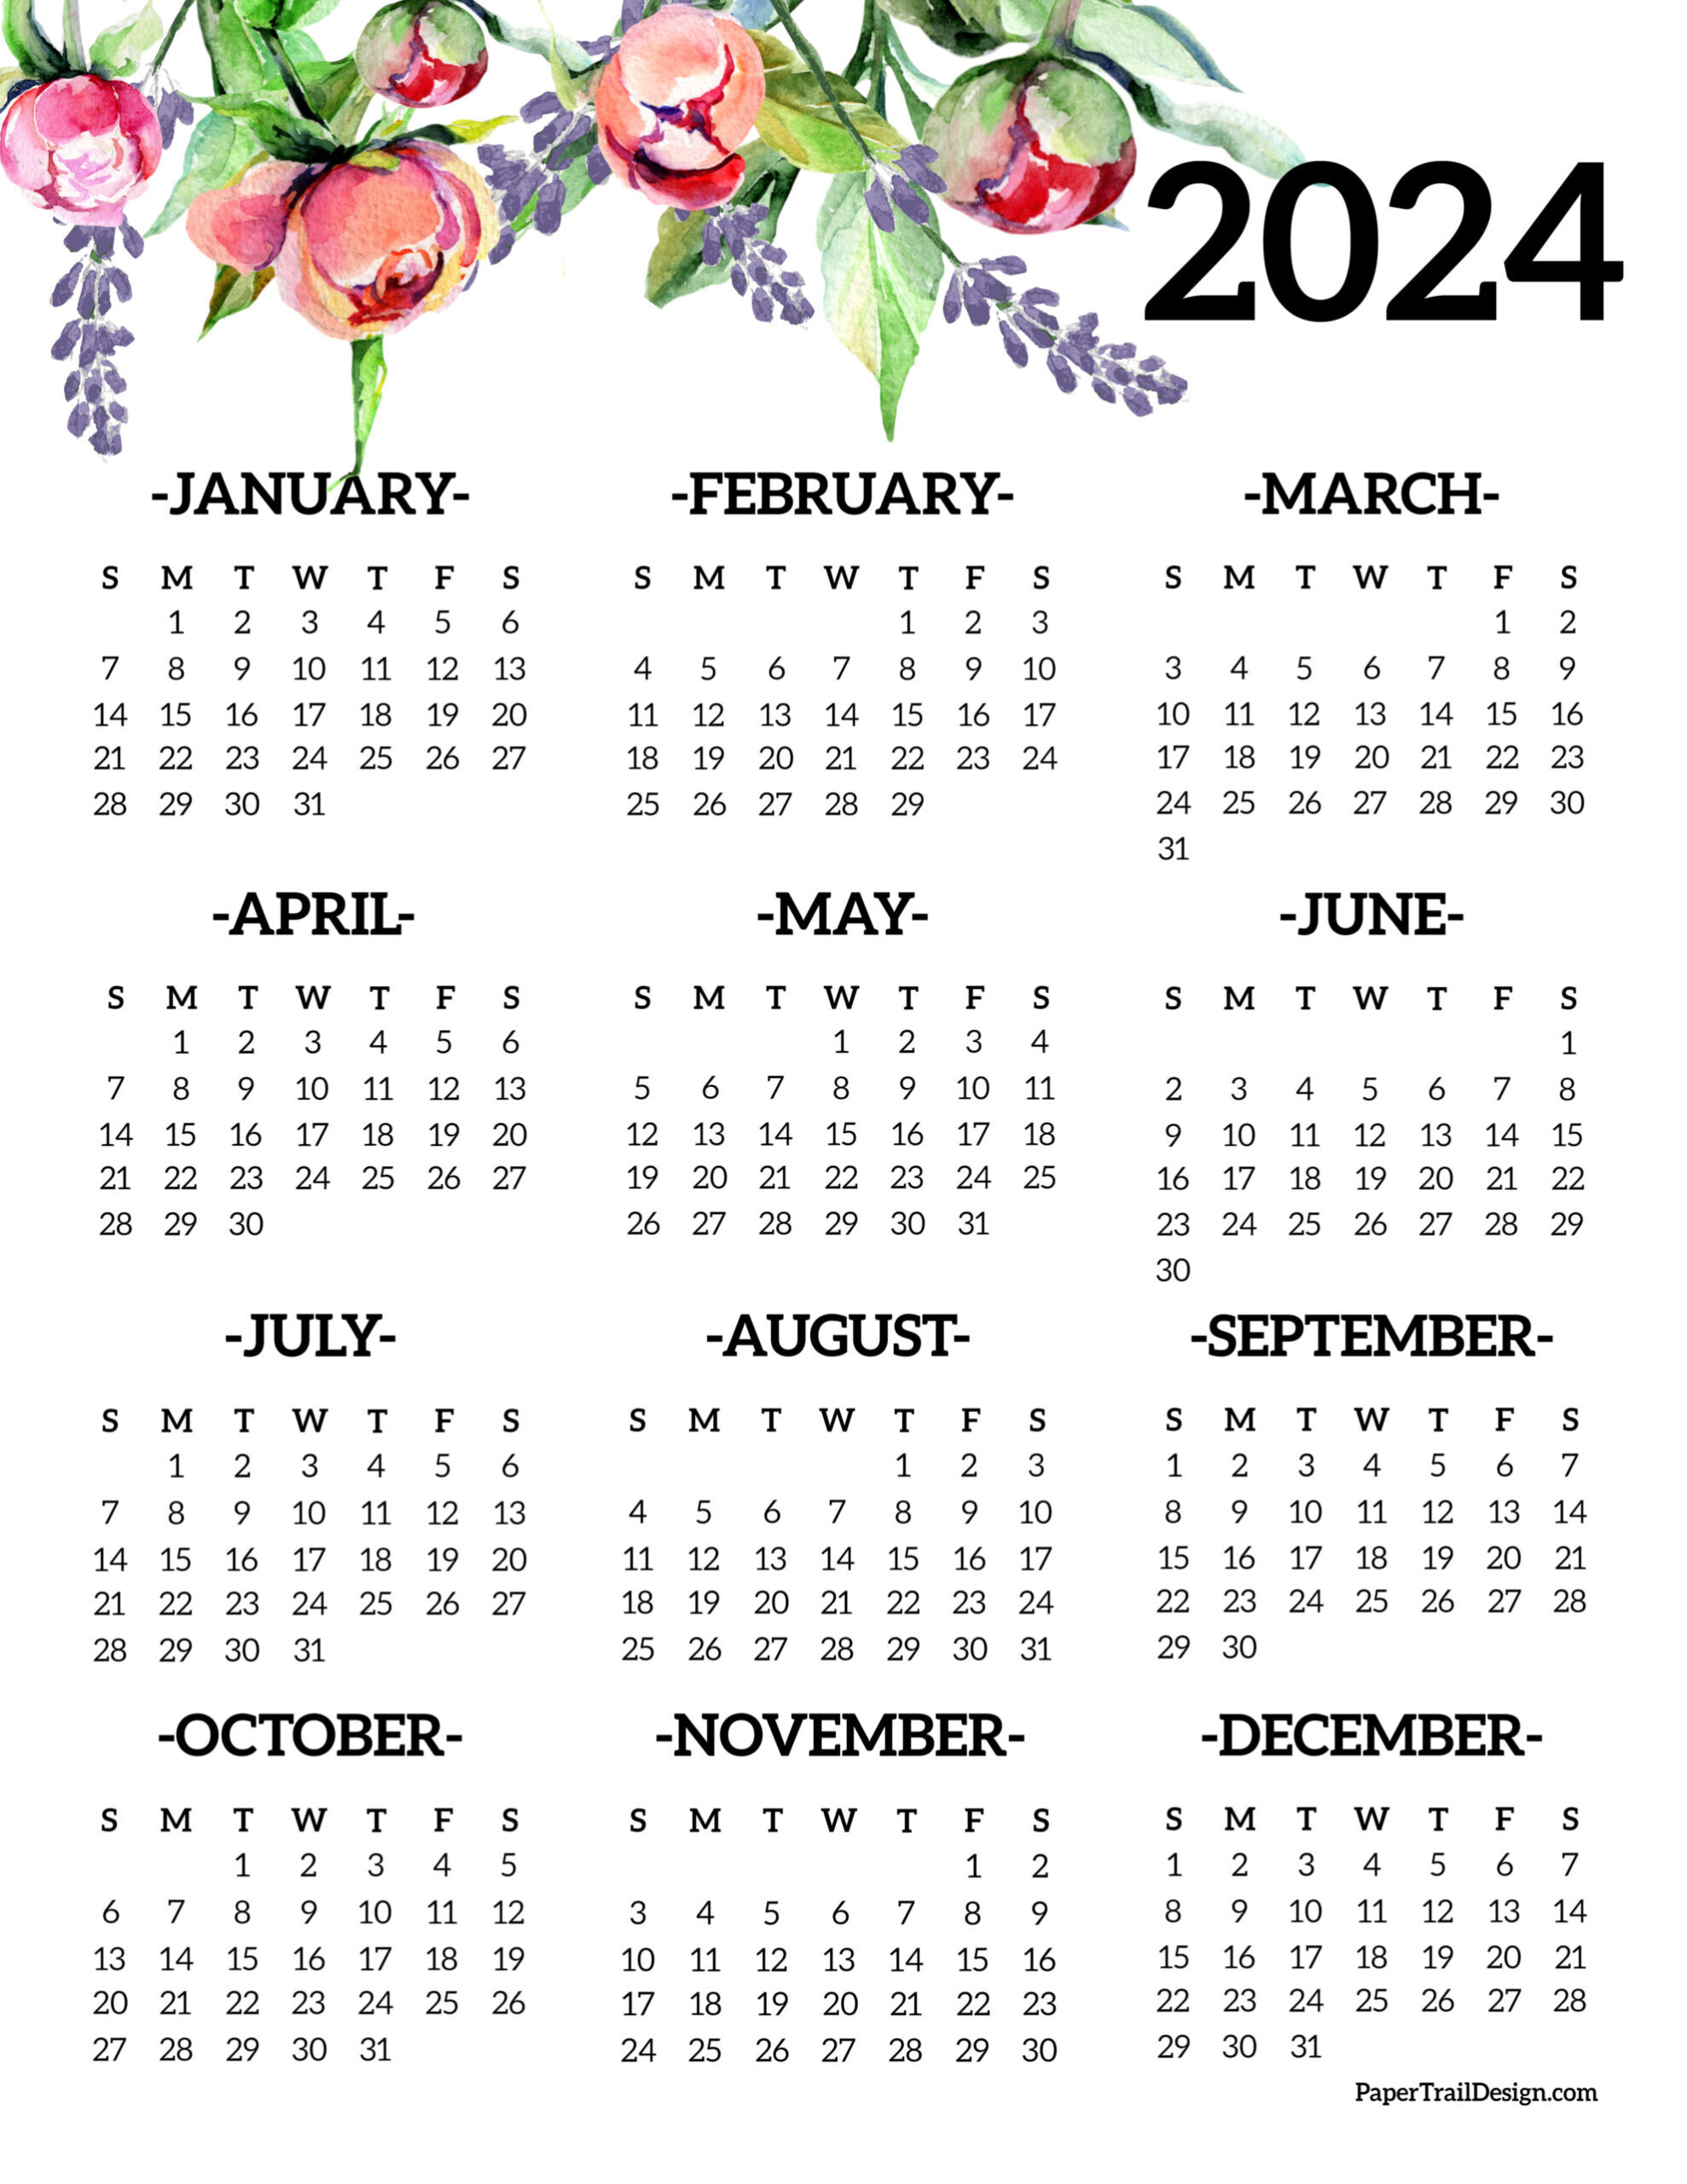 Calendar 2024 Printable One Page - Paper Trail Design for Calendar 2024 Printable One Page